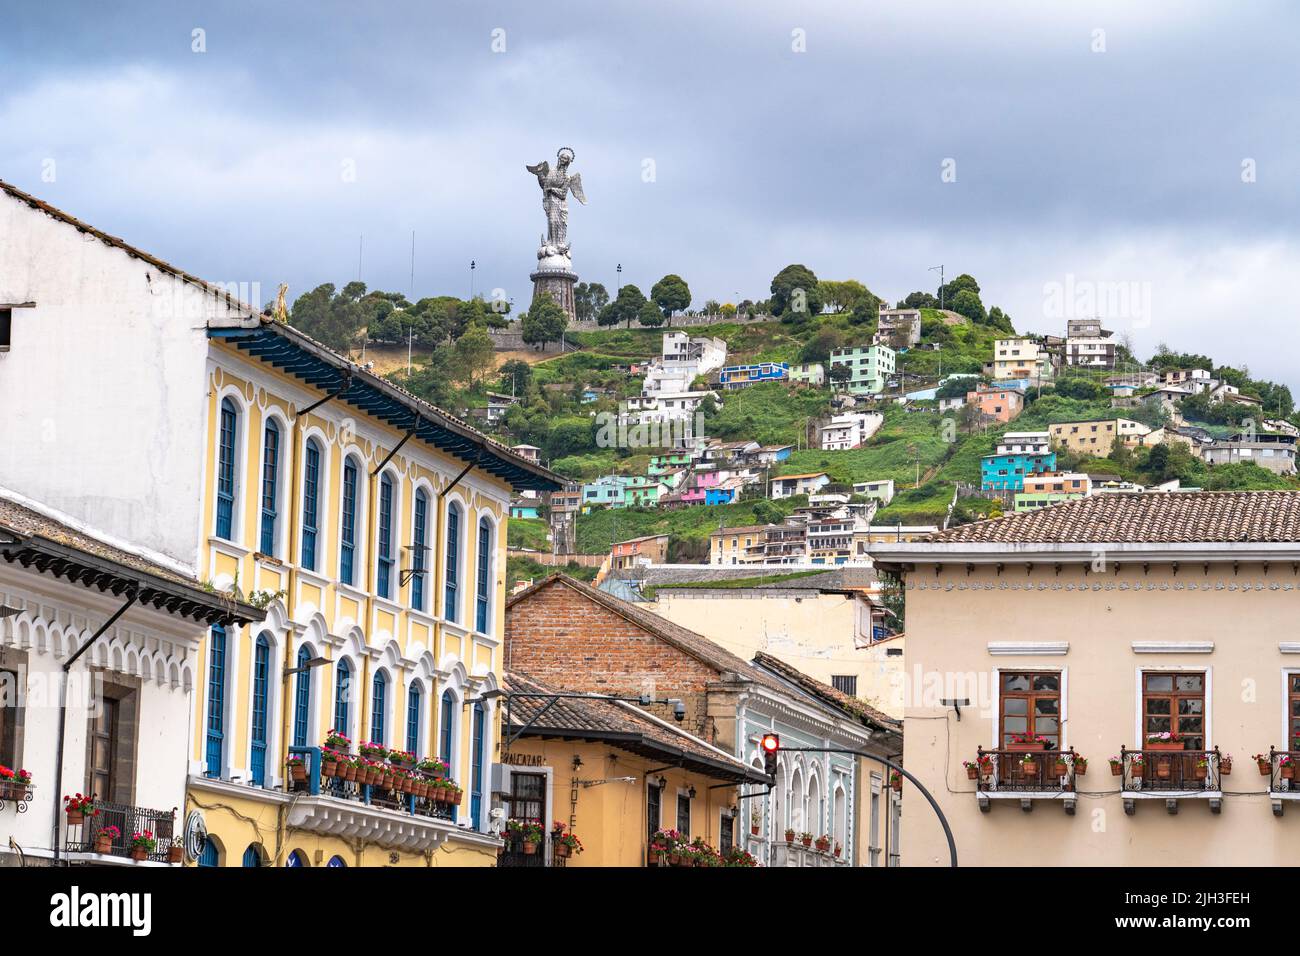 In central Quito, Ecuador there are museums, churches and a tall aluminum sculpture of the Virgin de El Panecillo, Virgin Mary with wings on hilltop Stock Photo